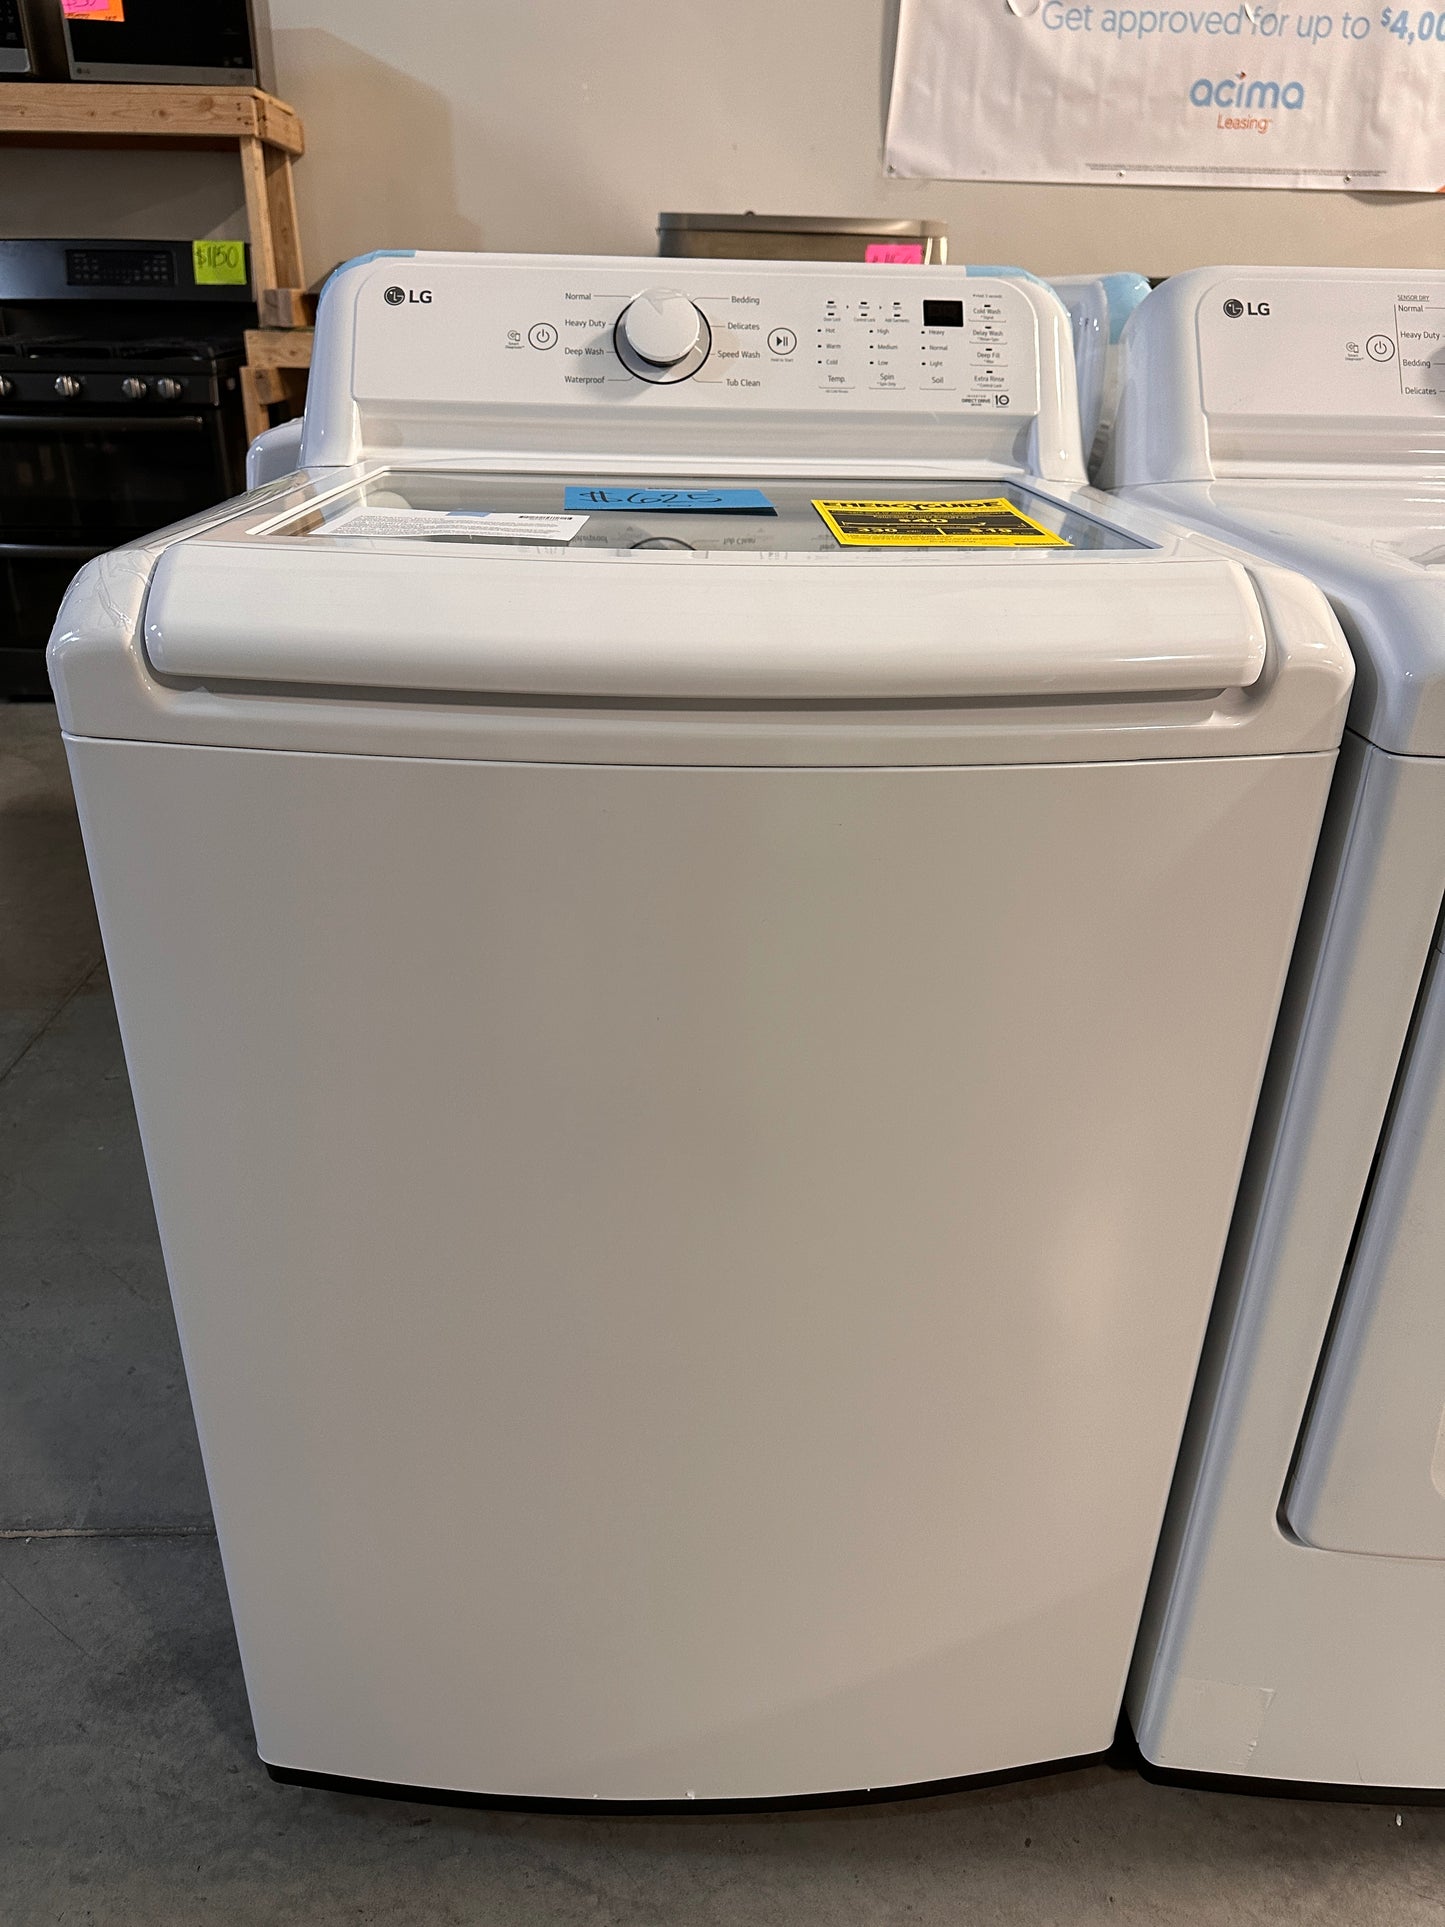 GREAT NEW LG SMART TOP LOAD WASHER - WAS12741